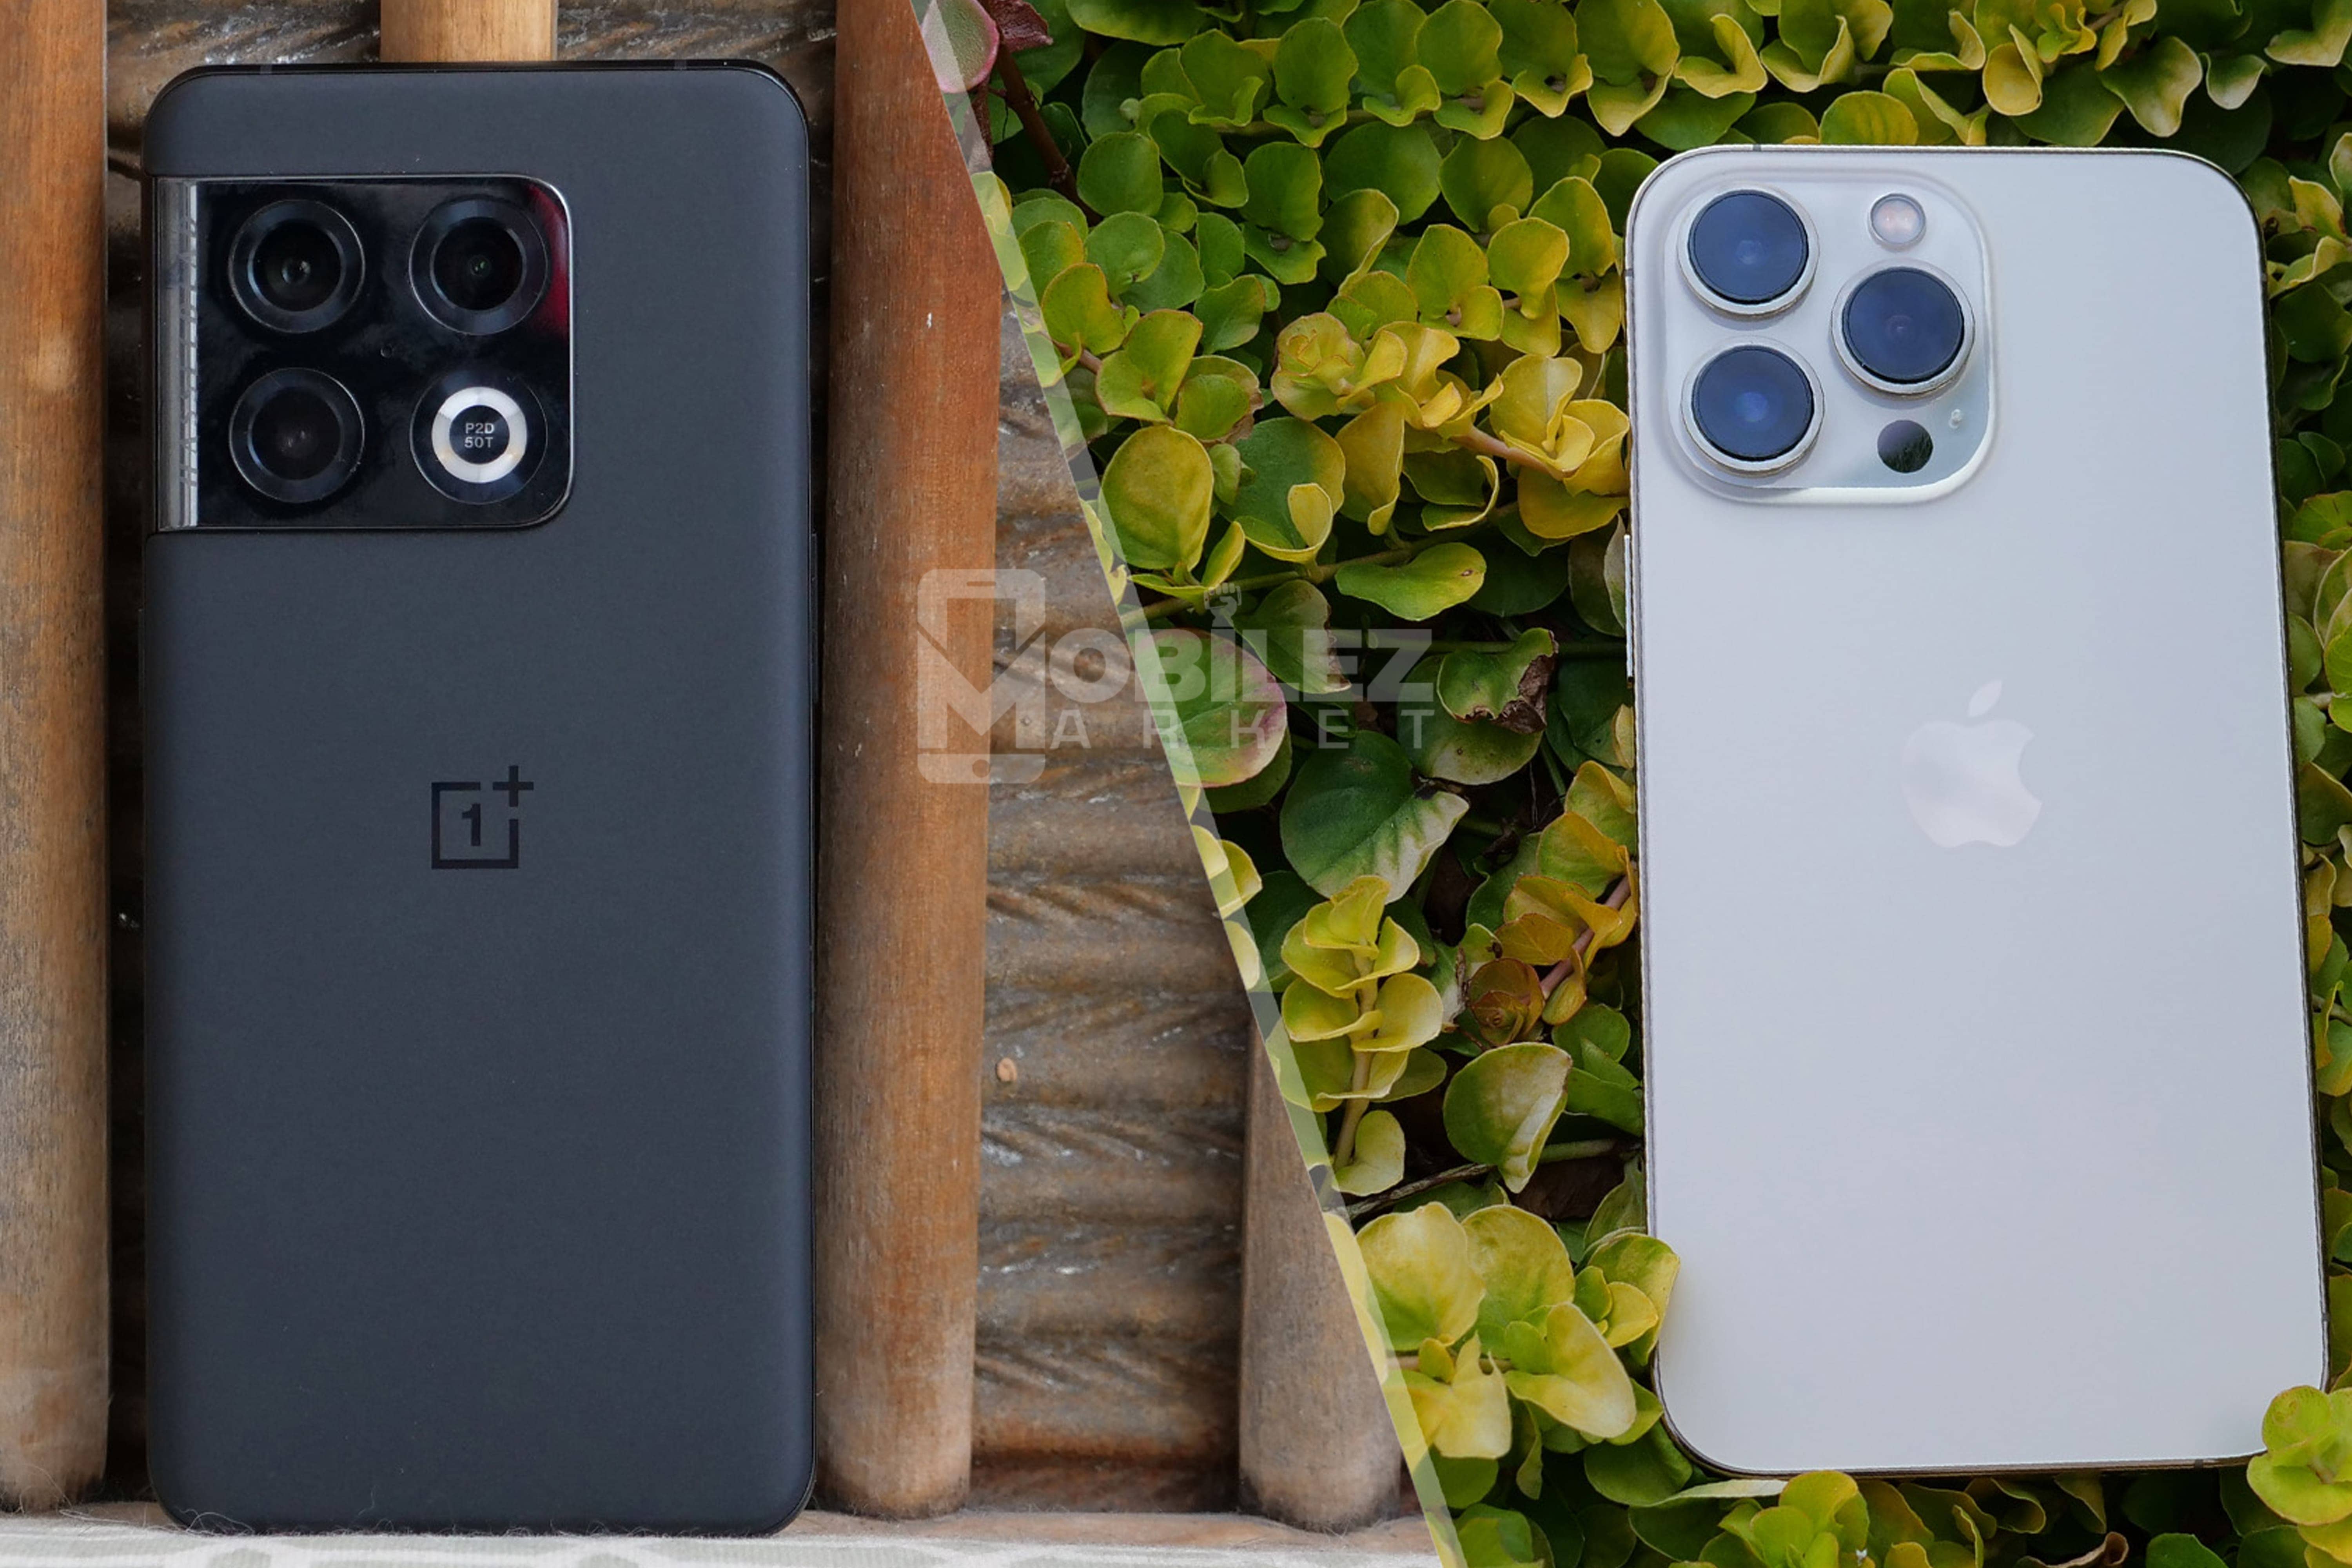 OnePlus 10 Pro vs. iPhone 13 Pro | Which Is the Better Choice?